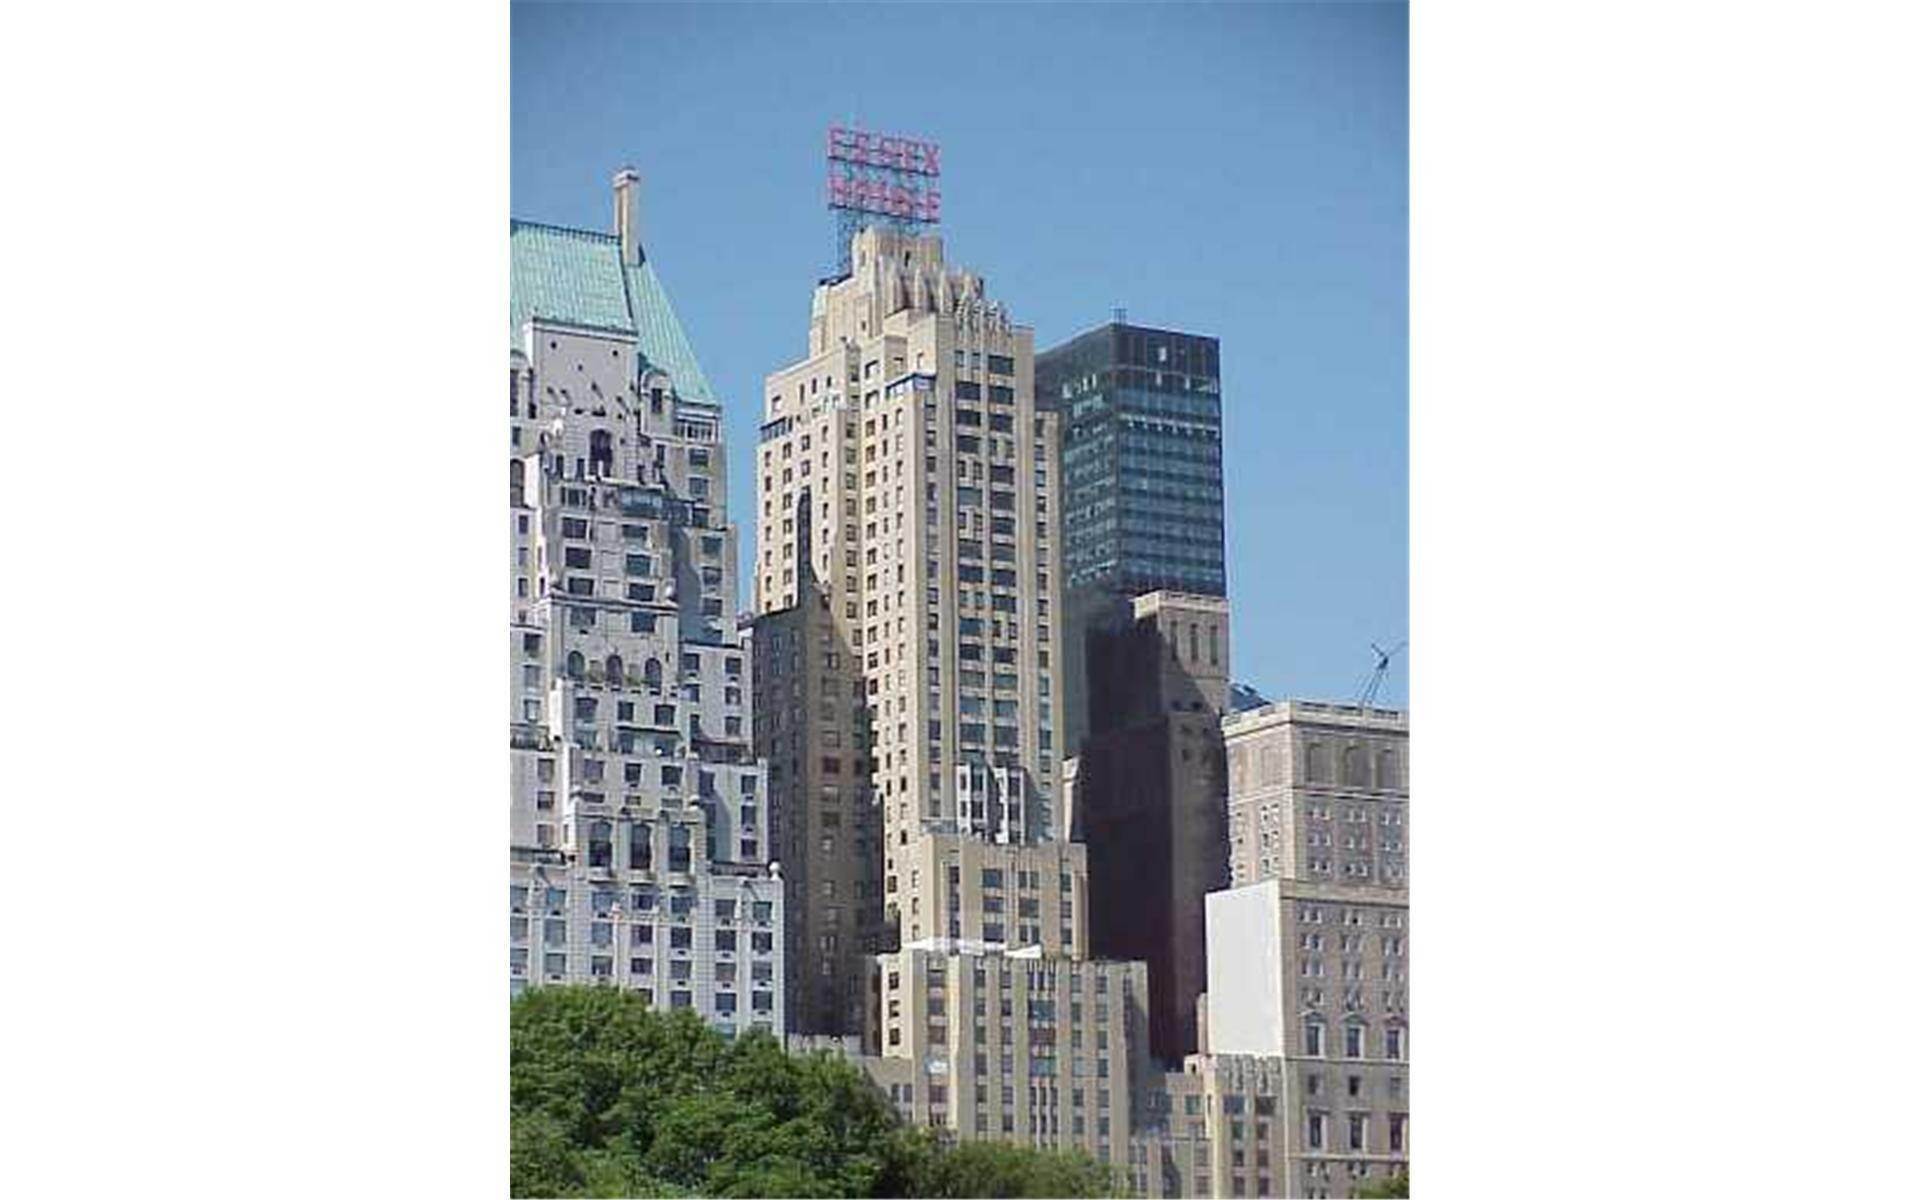 Condominium for Sale at Central Park South, Manhattan, NY 10019